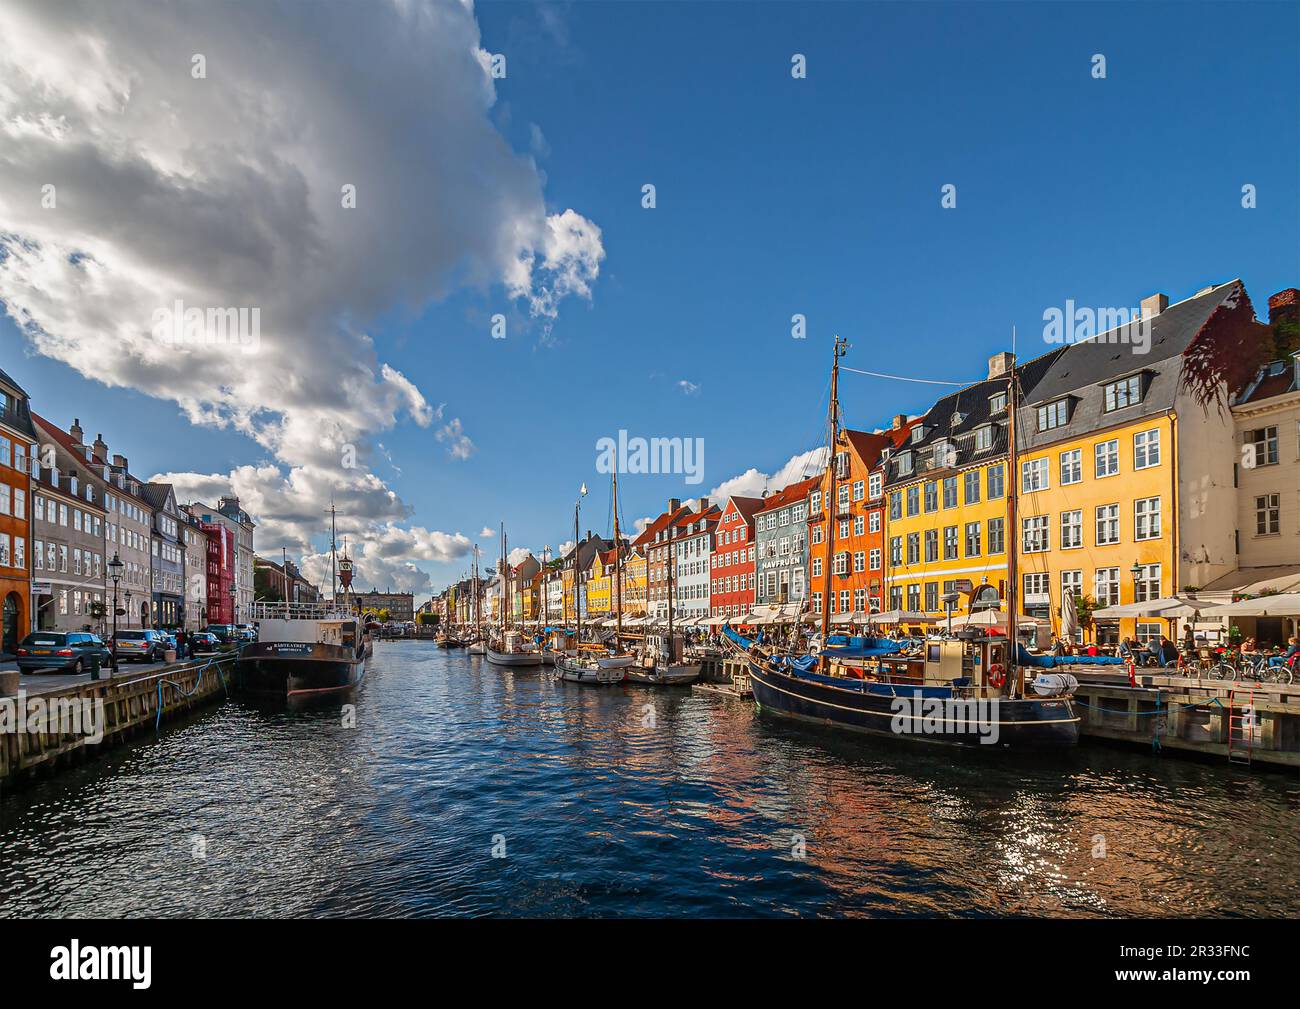 Copenhagen, Denmark - September 13, 2010: Line of iconic Nyhavn restaurant facades in bright colors plus other side canal under blue cloudscape. Boats Stock Photo